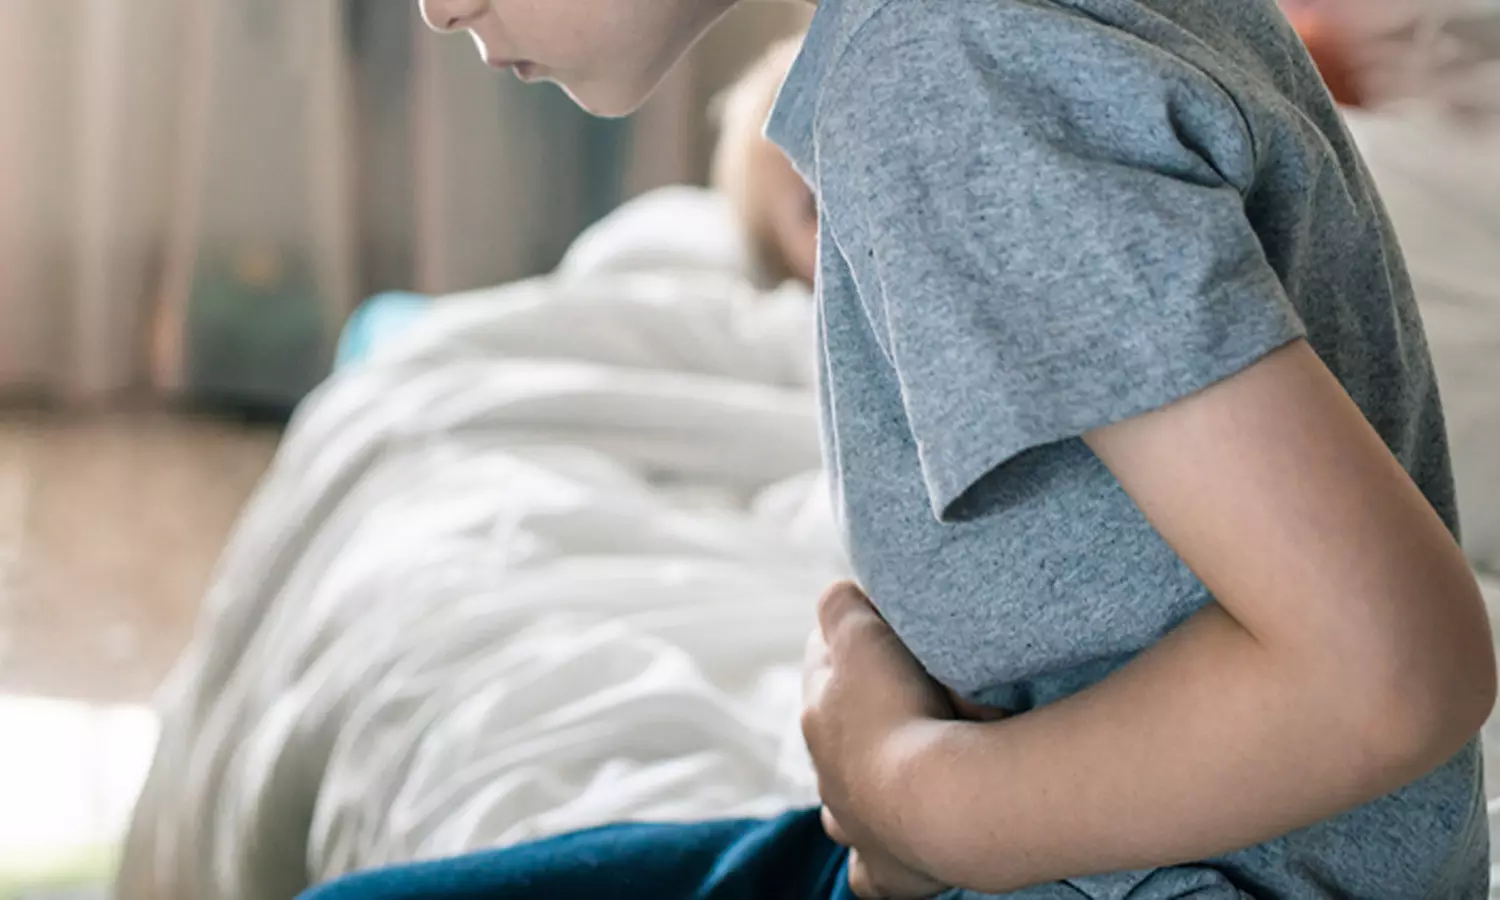 Children infected with COVID-19 show severe Gastrointestinal symptoms: JAMA